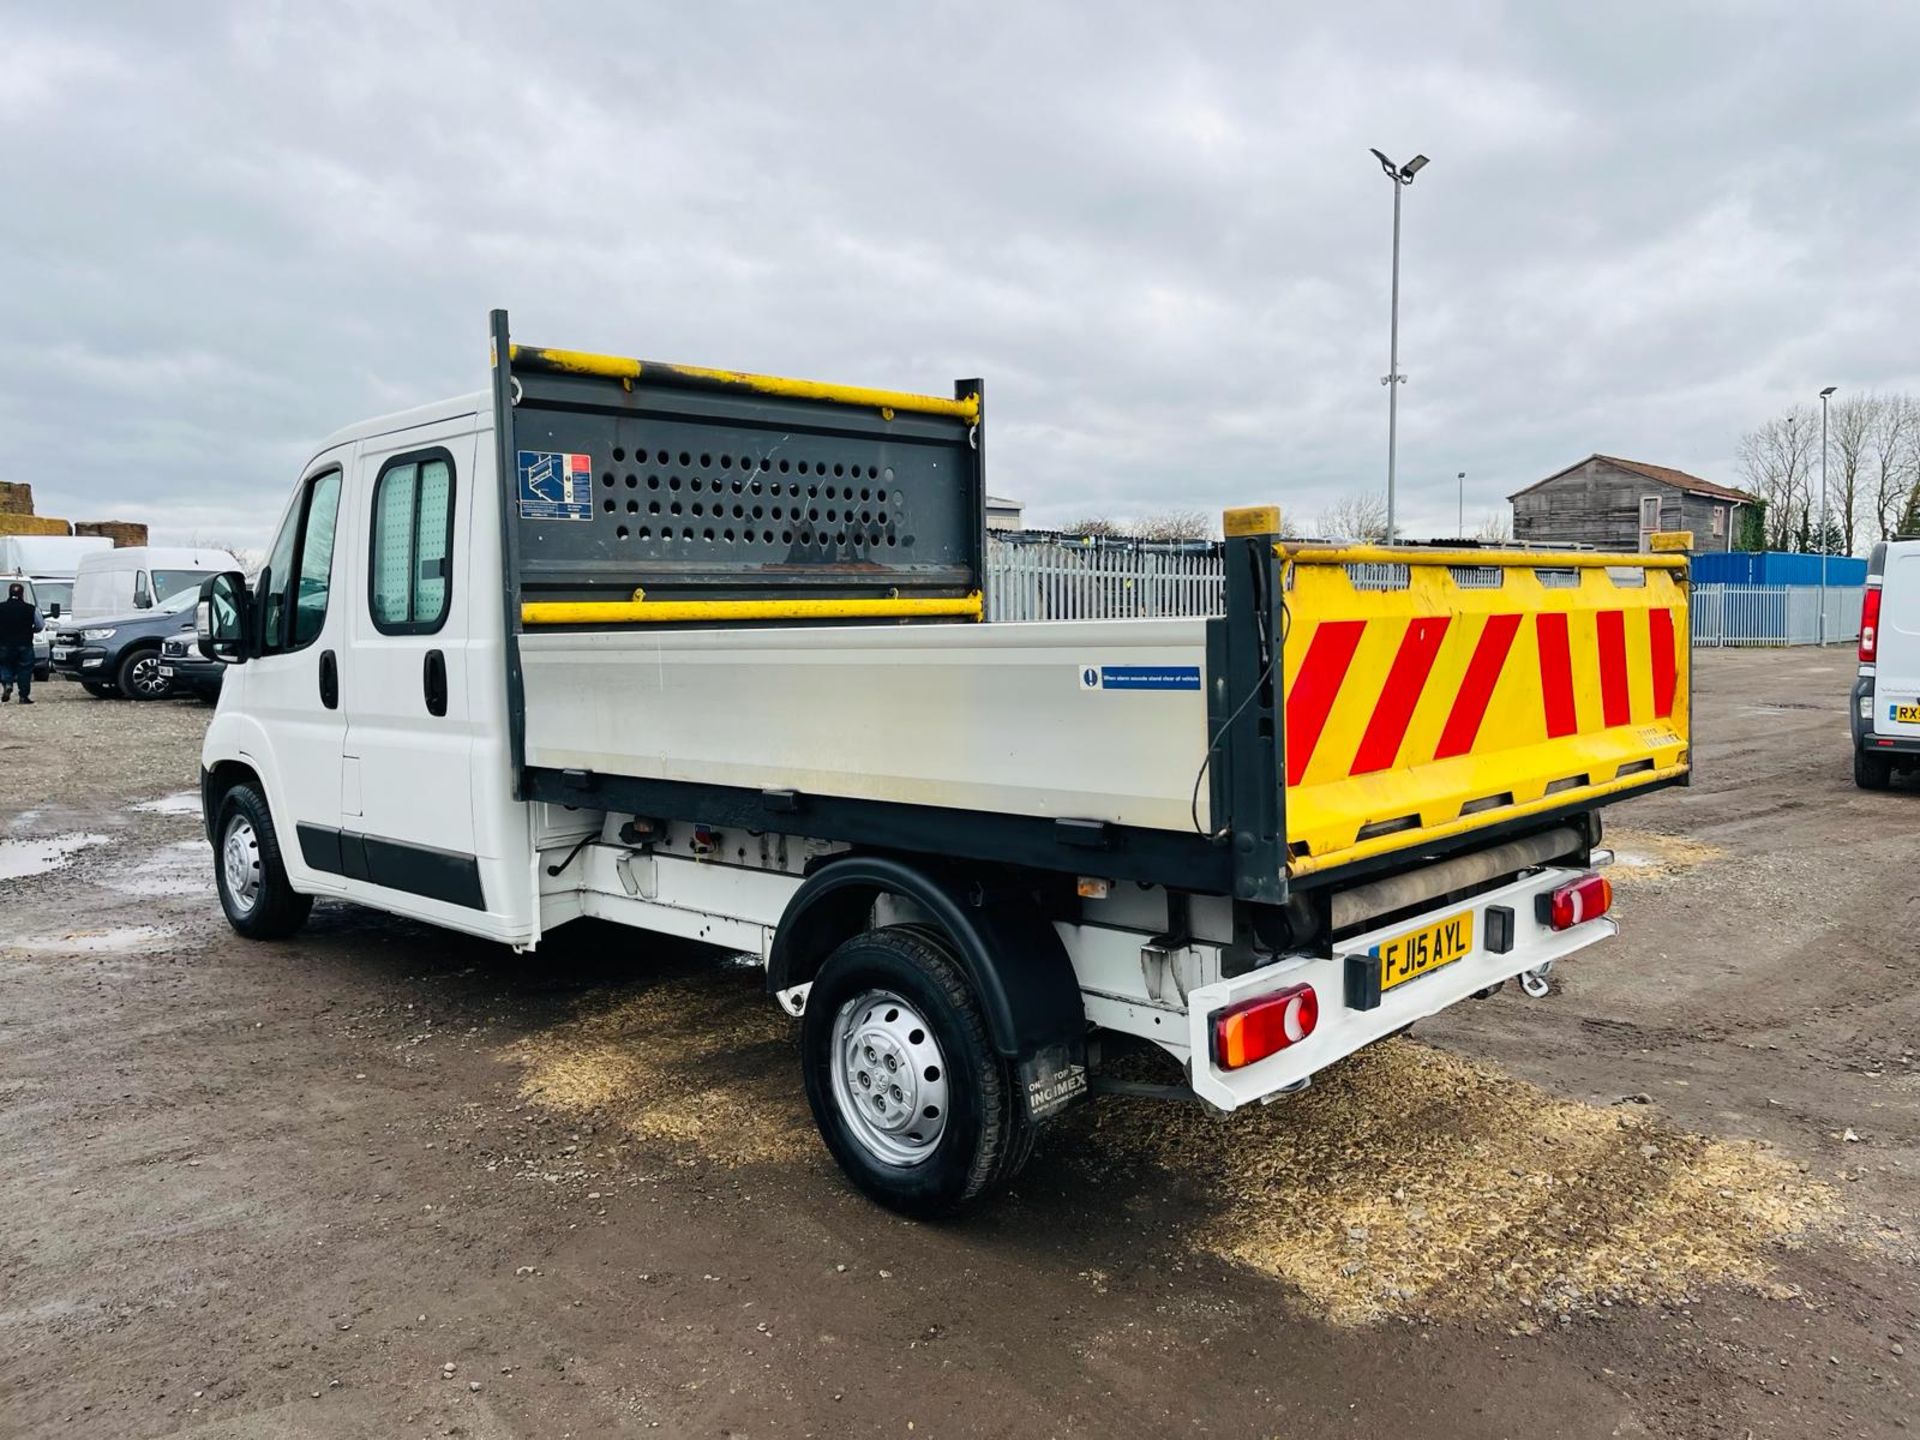 ** ON SALE ** Peugeot Boxer 335 2.2 Hdi 130 L3 CrewCab Tipper 2015 '15 Reg' ONLY 56,897 mile - Image 8 of 31